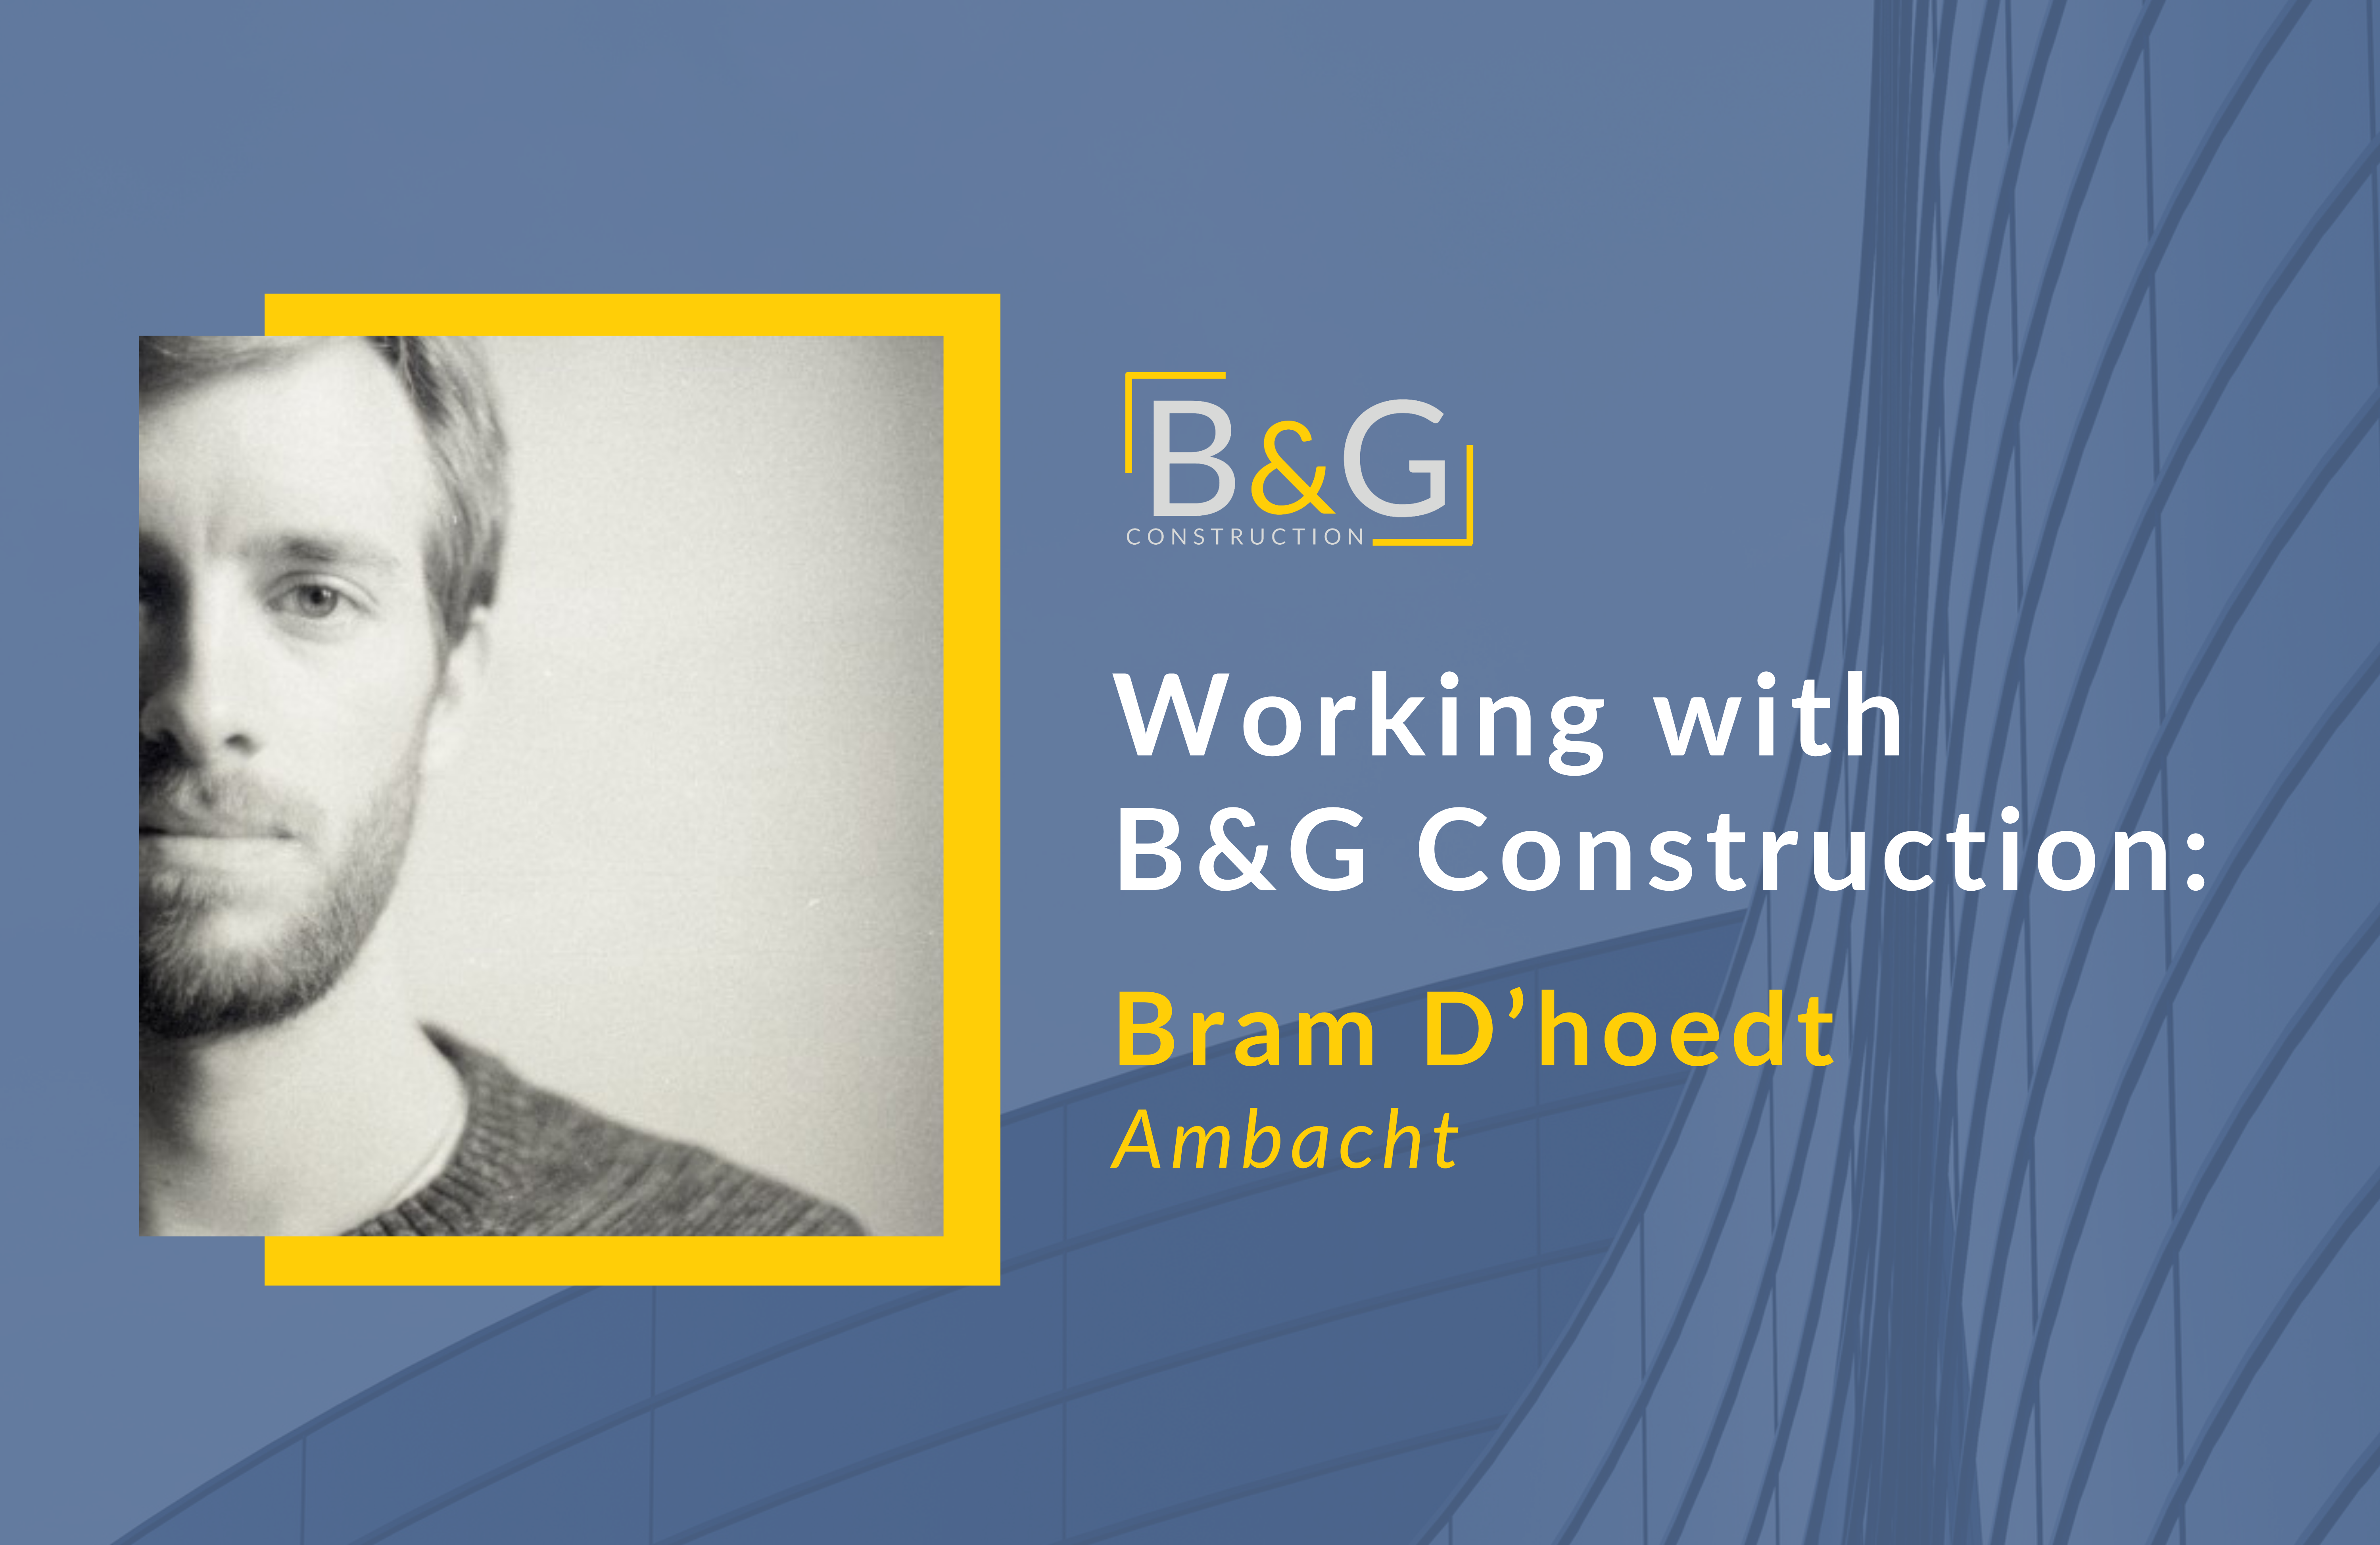 Graphic with the copy "Working with B&G Construction: Bram D'hoedt - Ambacht"